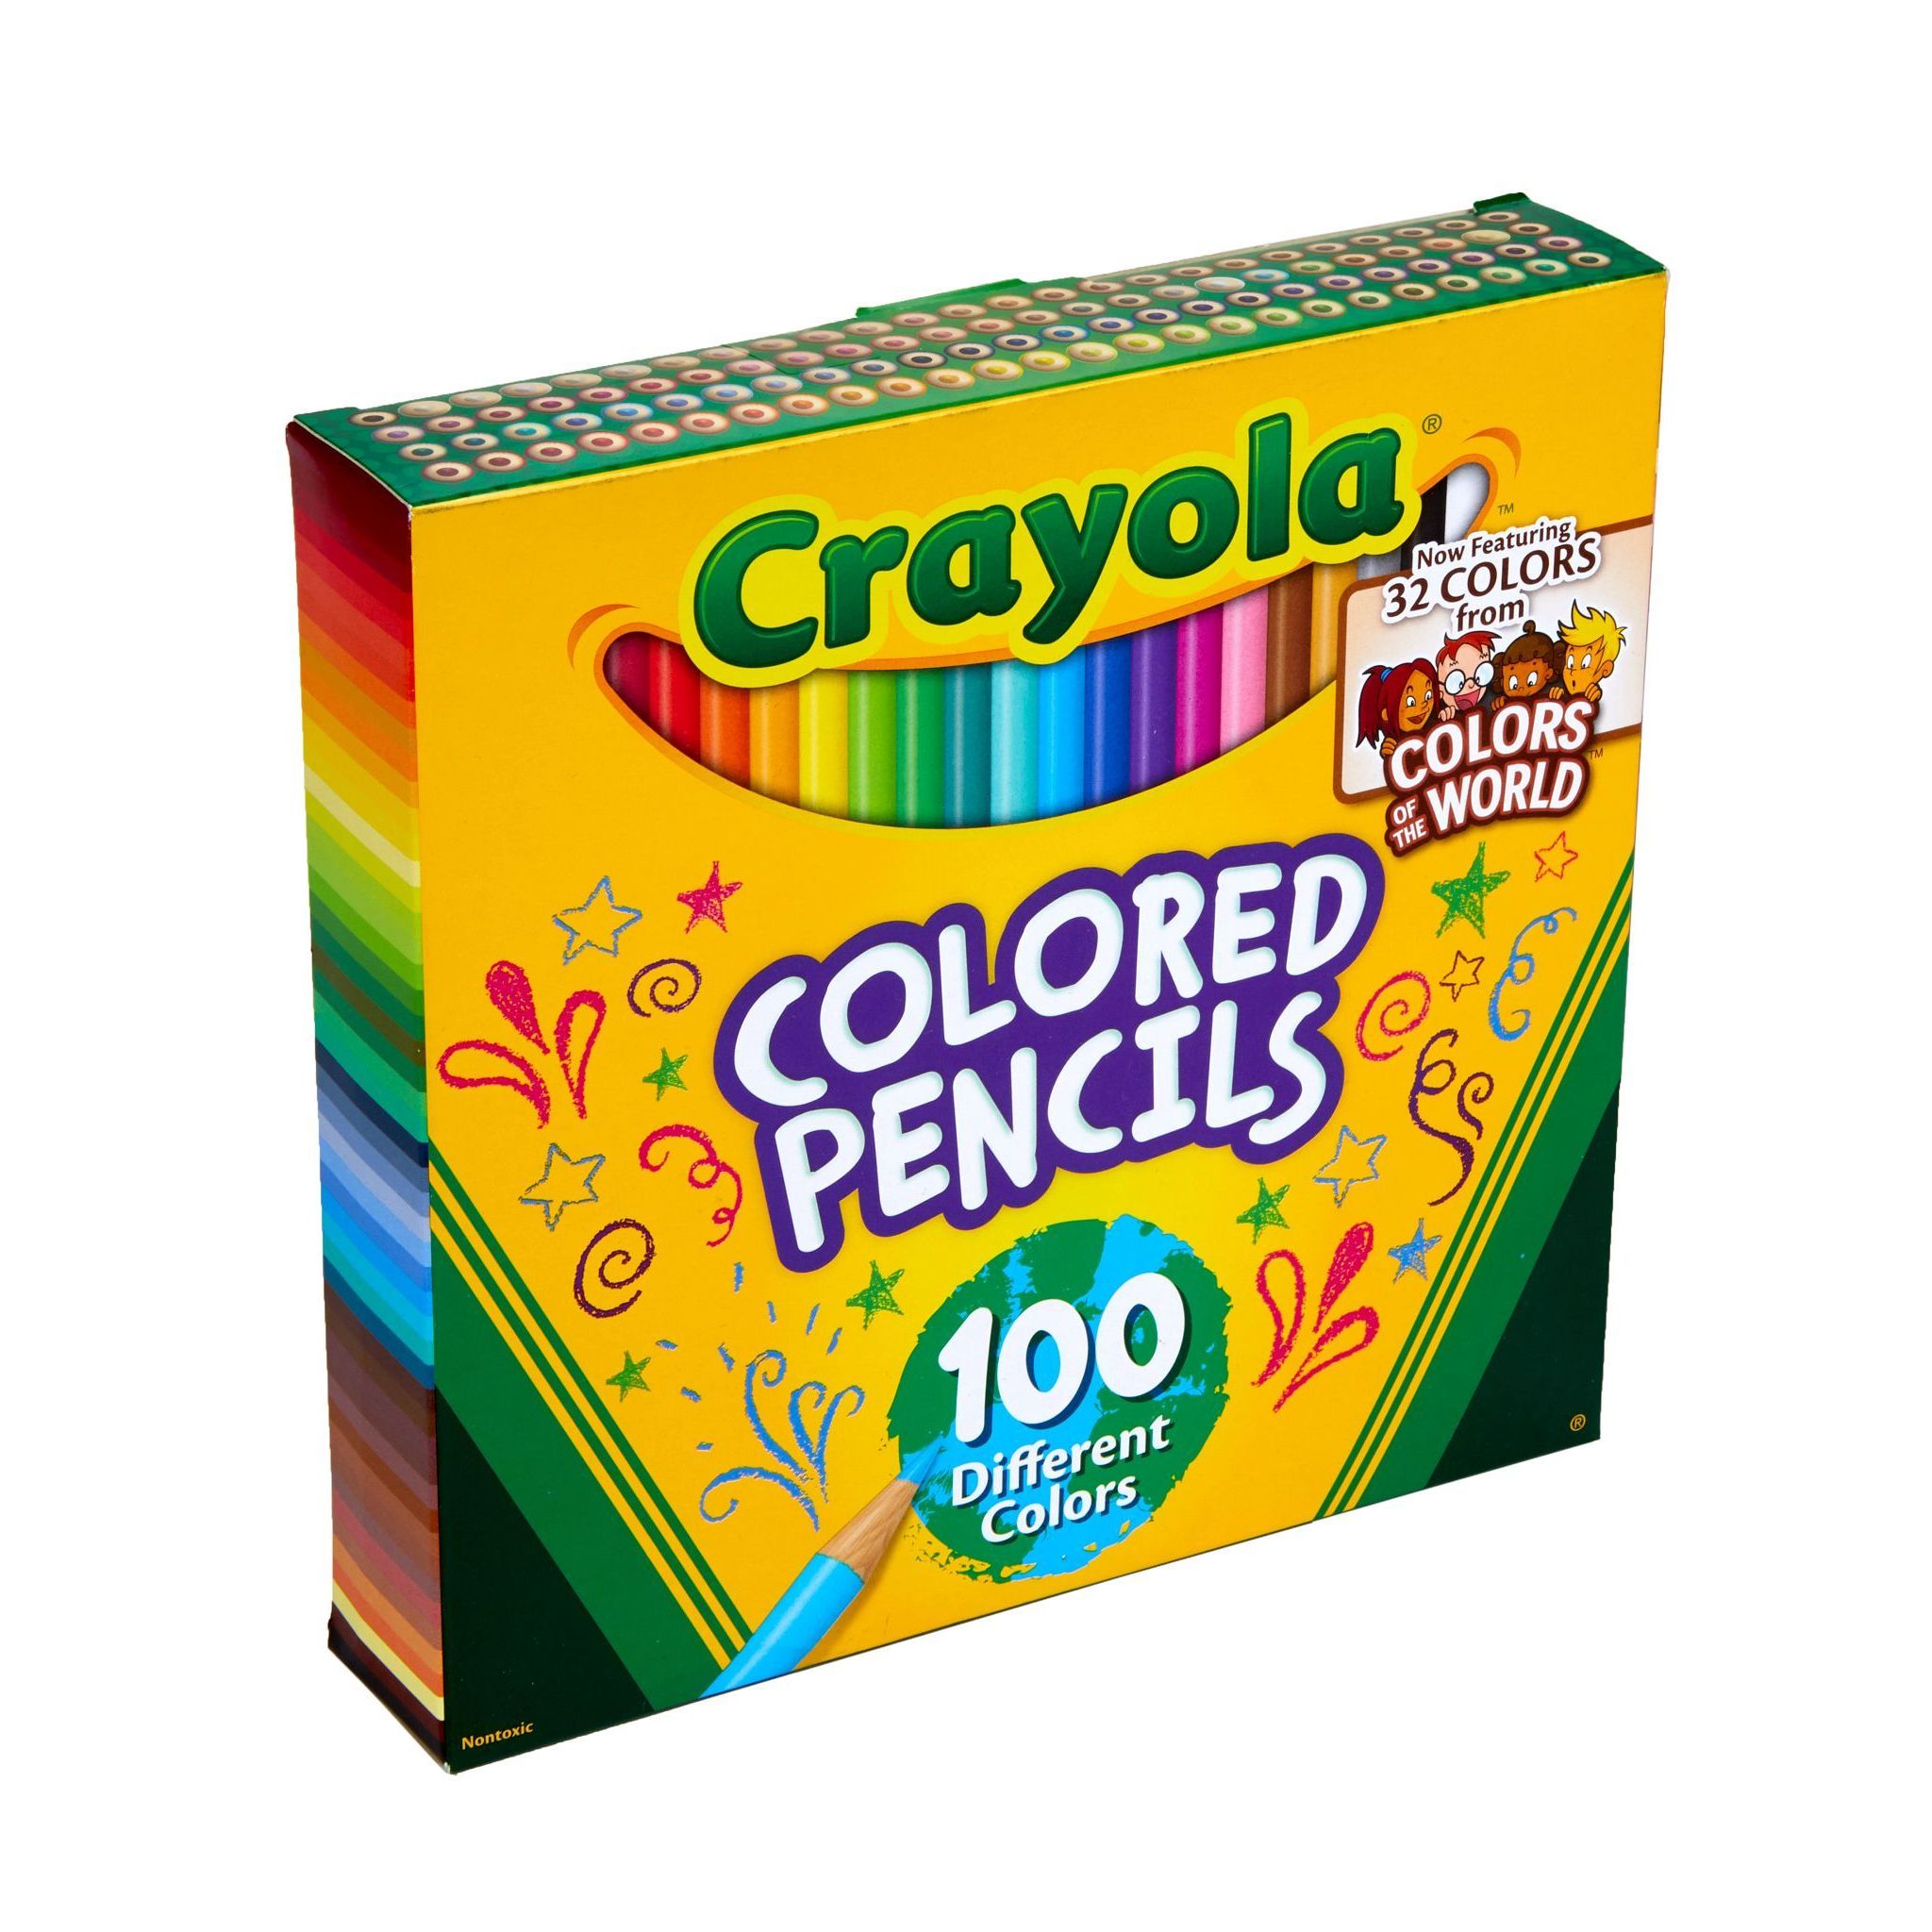 Crayola Colored Pencils, School Supplies, With Colors of the World ...